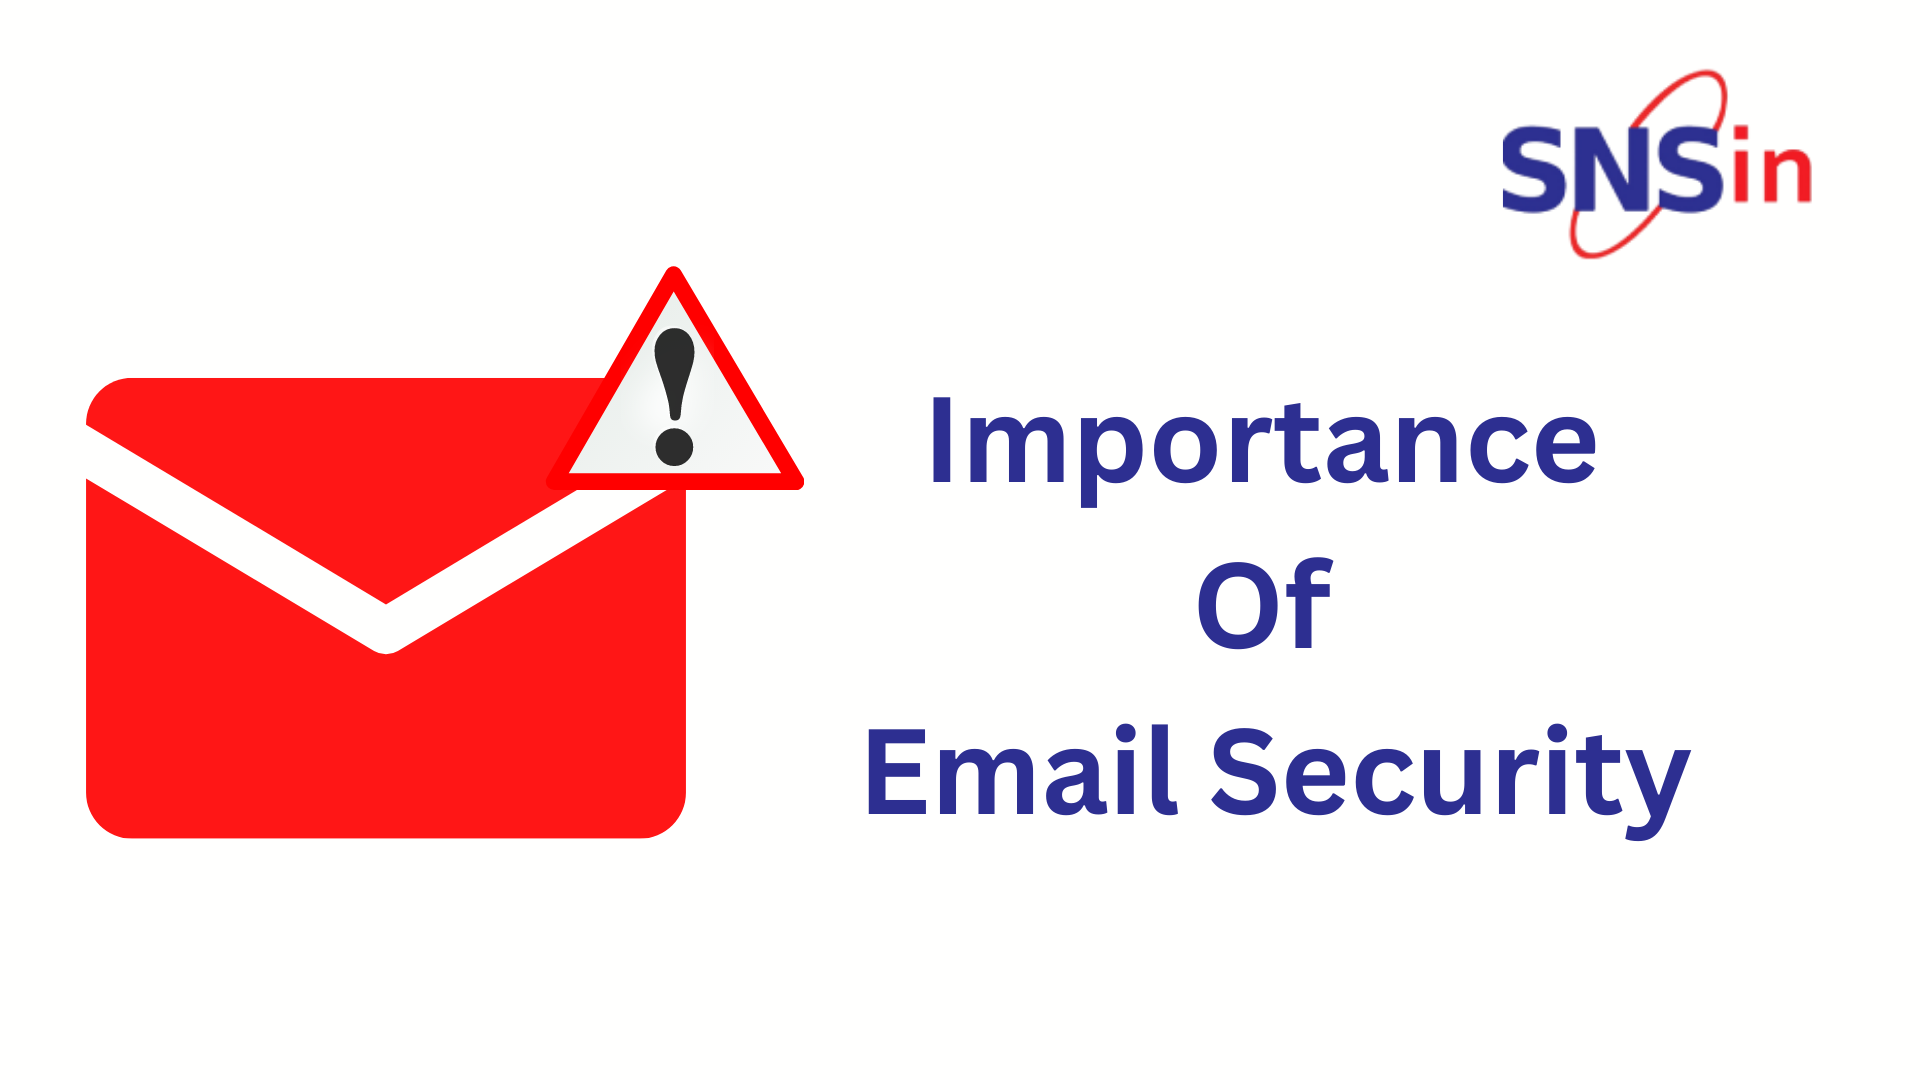 IMPORTANCE OF EMAIL SECURITY